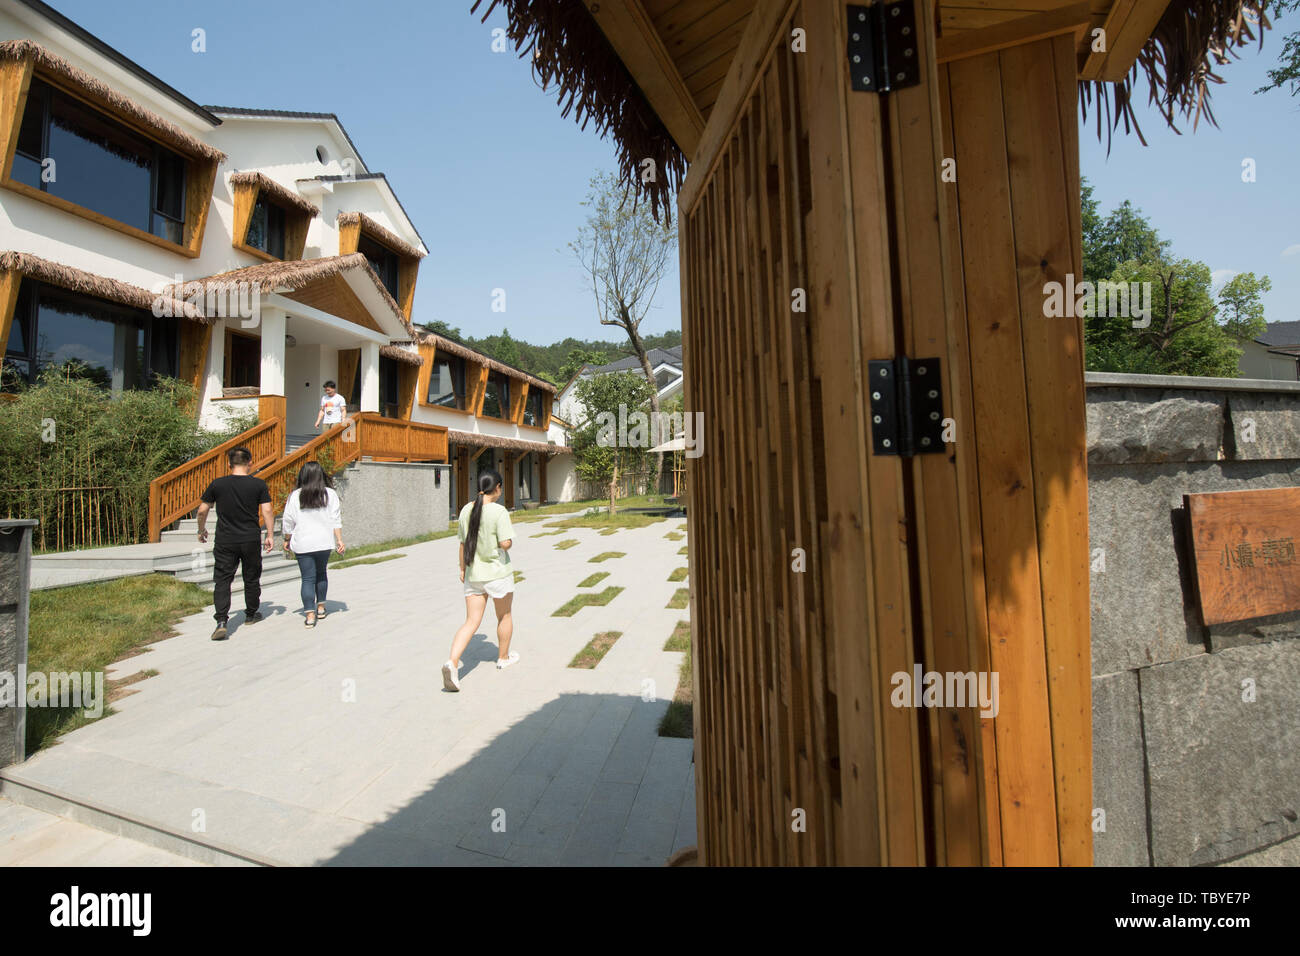 (190604) -- ANJI, June 4, 2019 (Xinhua) -- People walk into a guesthouse designed by Chen Gu in Anji, east China's Zhejiang Province, June 4, 2019. Chen Gu, born in 1971, has been working in design industry for more than 20 years. He started to re-design village houses after returning back to his hometown Anji. In 2014, Chen renovated a group of residential houses with the support of the local government. Since then, five guesthouses have been renovated and put into use. On his effort, the residential area once fallen has gradually become a guesthouse village equipped with accommodation, dinin Stock Photo